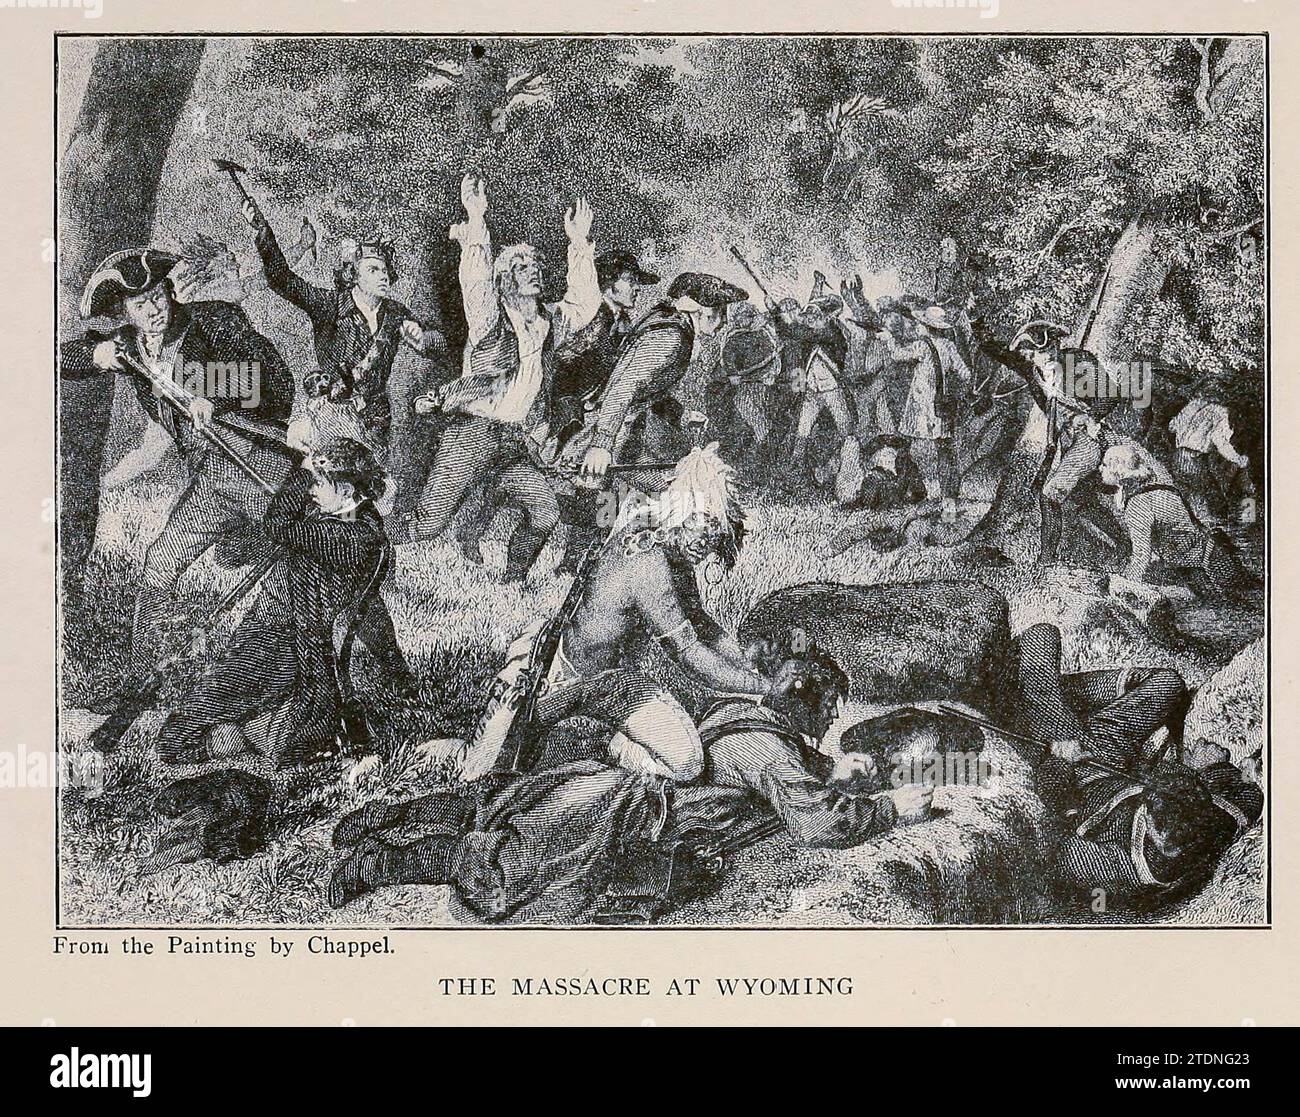 The Massacre at Wyoming from the book A wonderland of the East, comprising the lake and mountain region of New England and eastern New York; a book for those who love to wander among beautiful lakes and rivers, valleys and mountains, or in places made famous by historic men and events; to which is added an afterword on the worth-while in this wonderland of the East, with some suggestions to motor-tourists on how best to find it by Kitchin, William Copeman. Publication date 1920 Publisher: The Page company Stock Photo